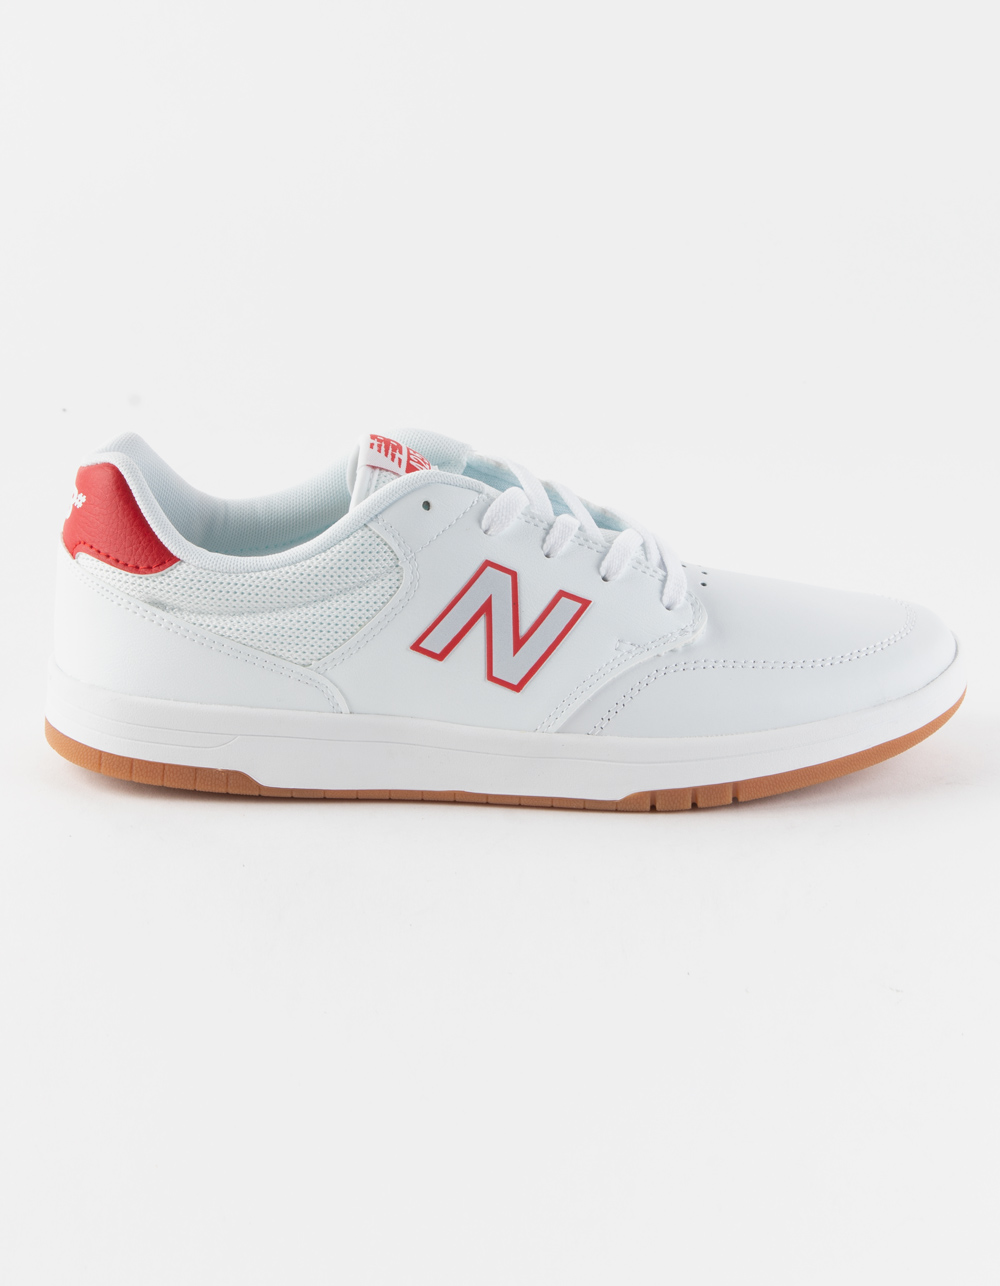 NEW BALANCE 425 Mens Shoes - WHT/RED | Tillys